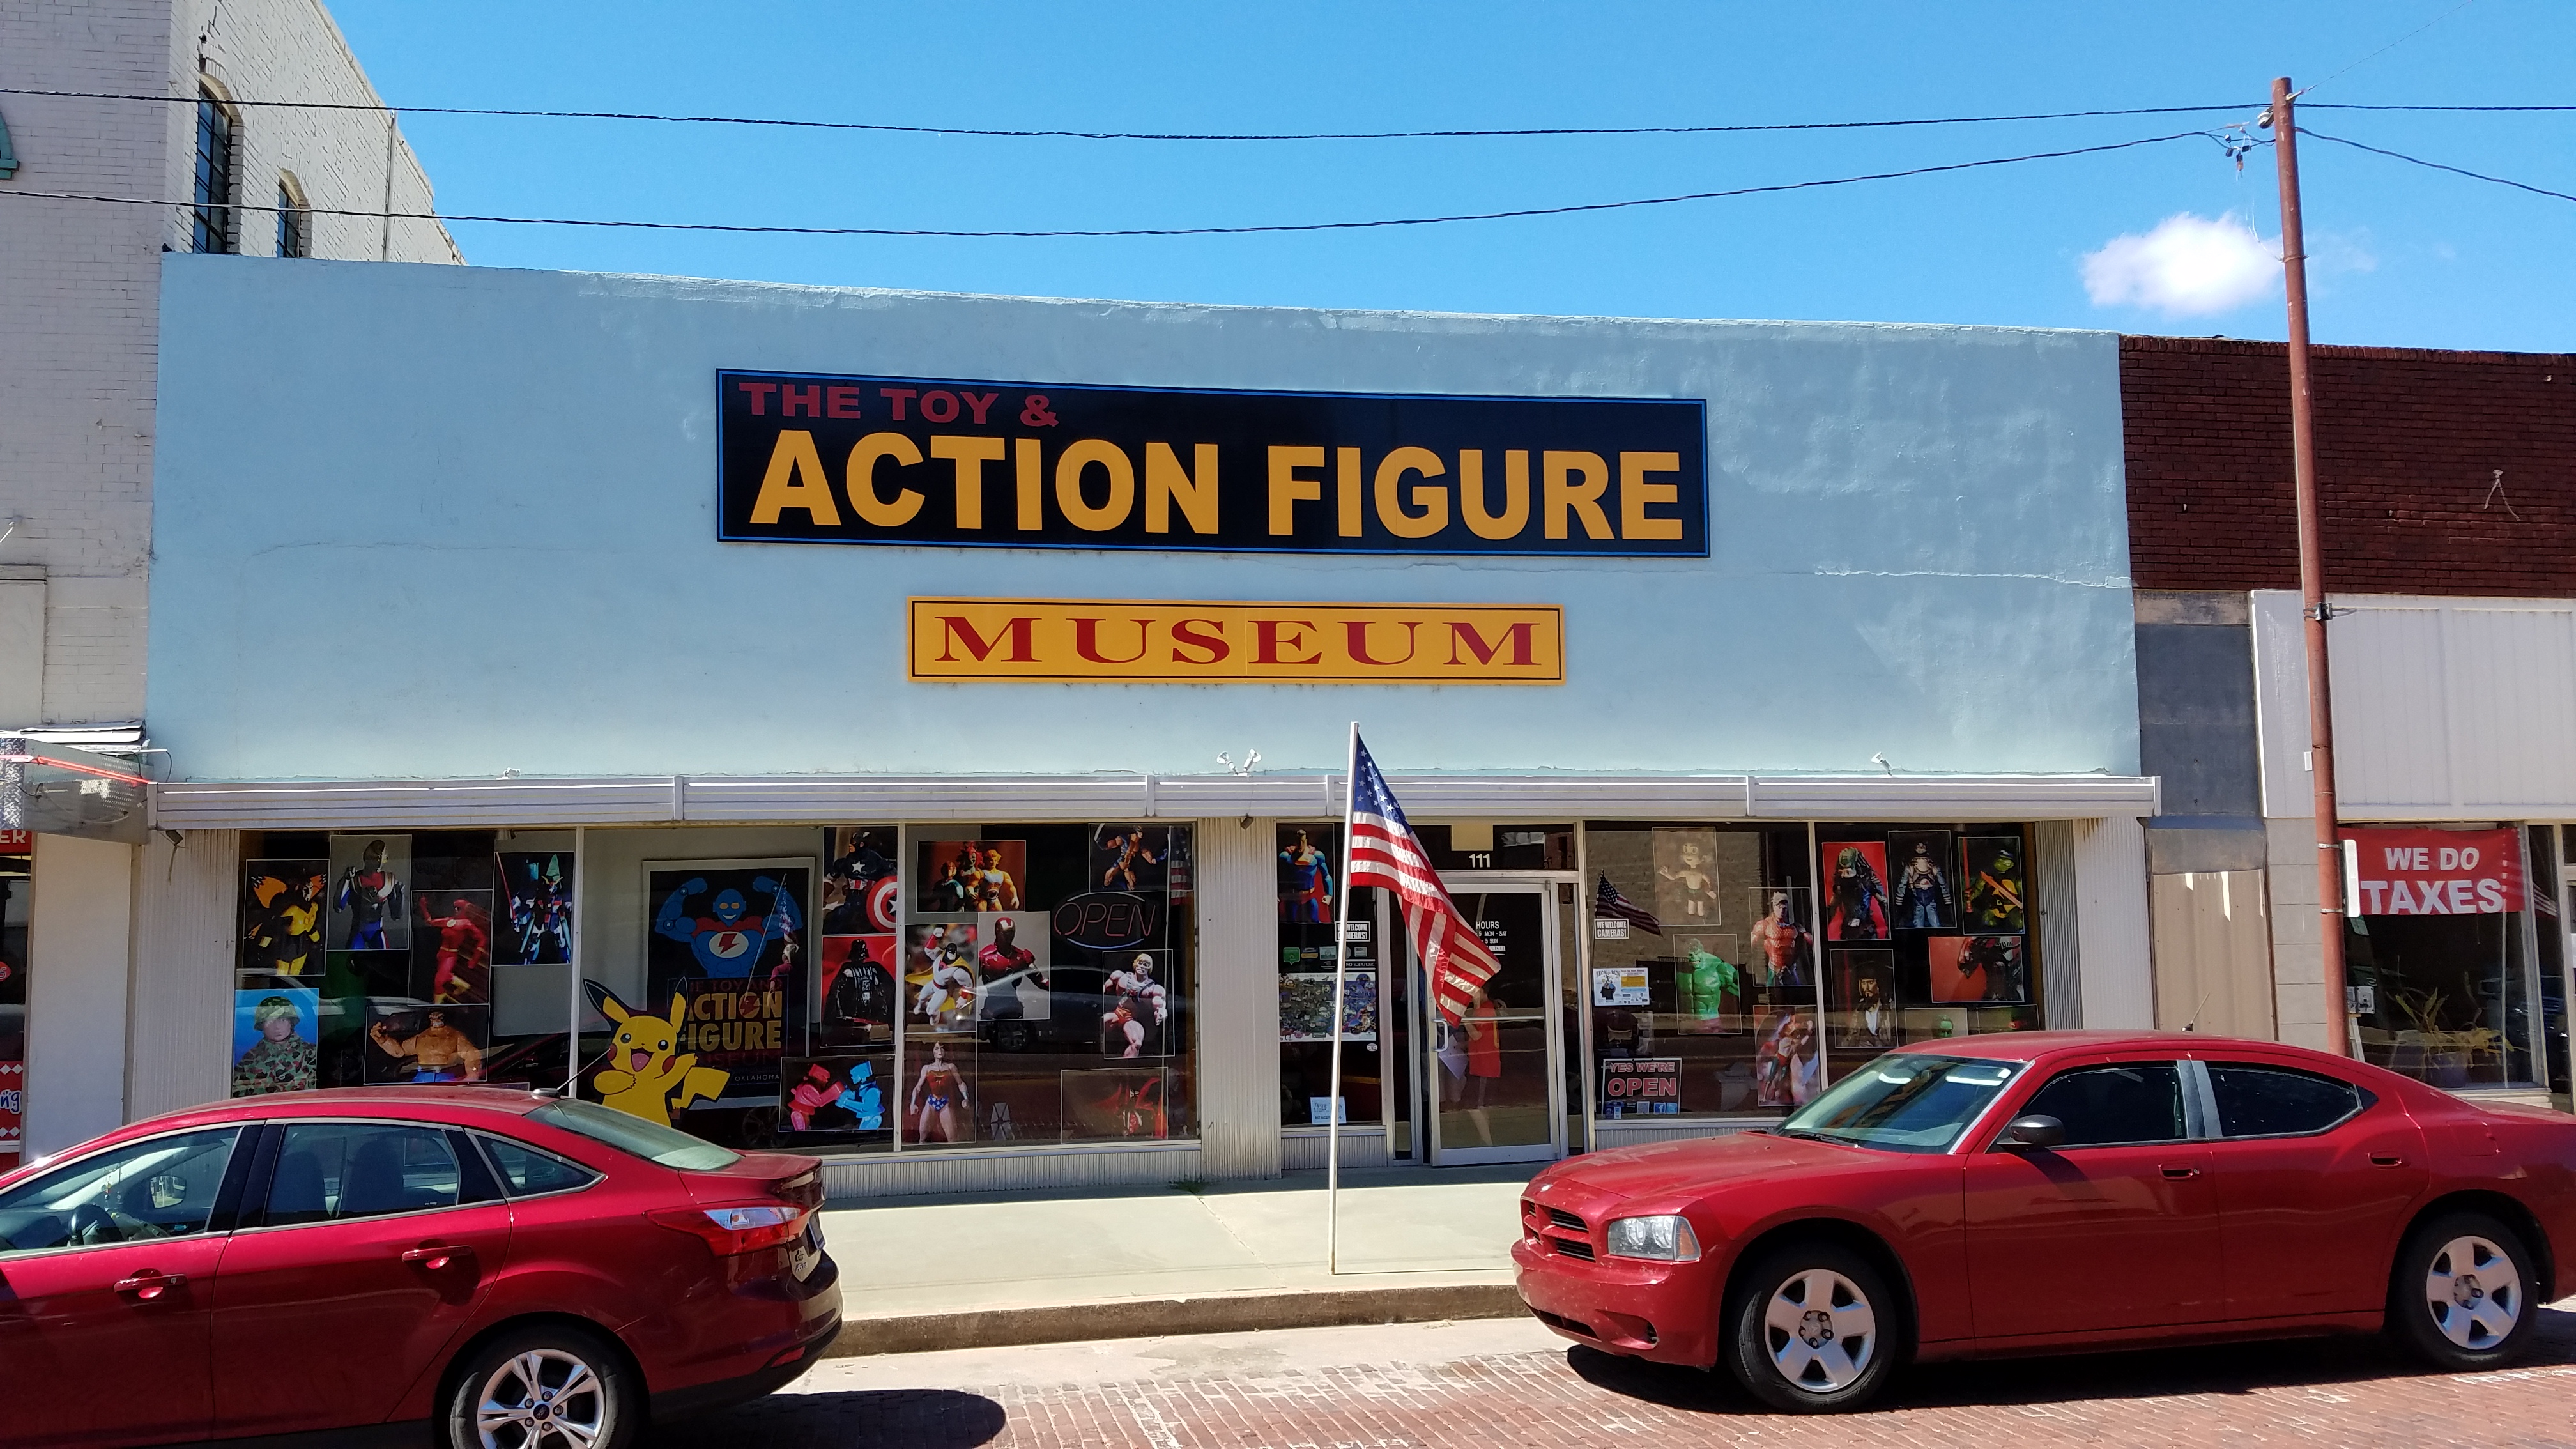 The Toy and Action Figure Museum: Be a Kid Again